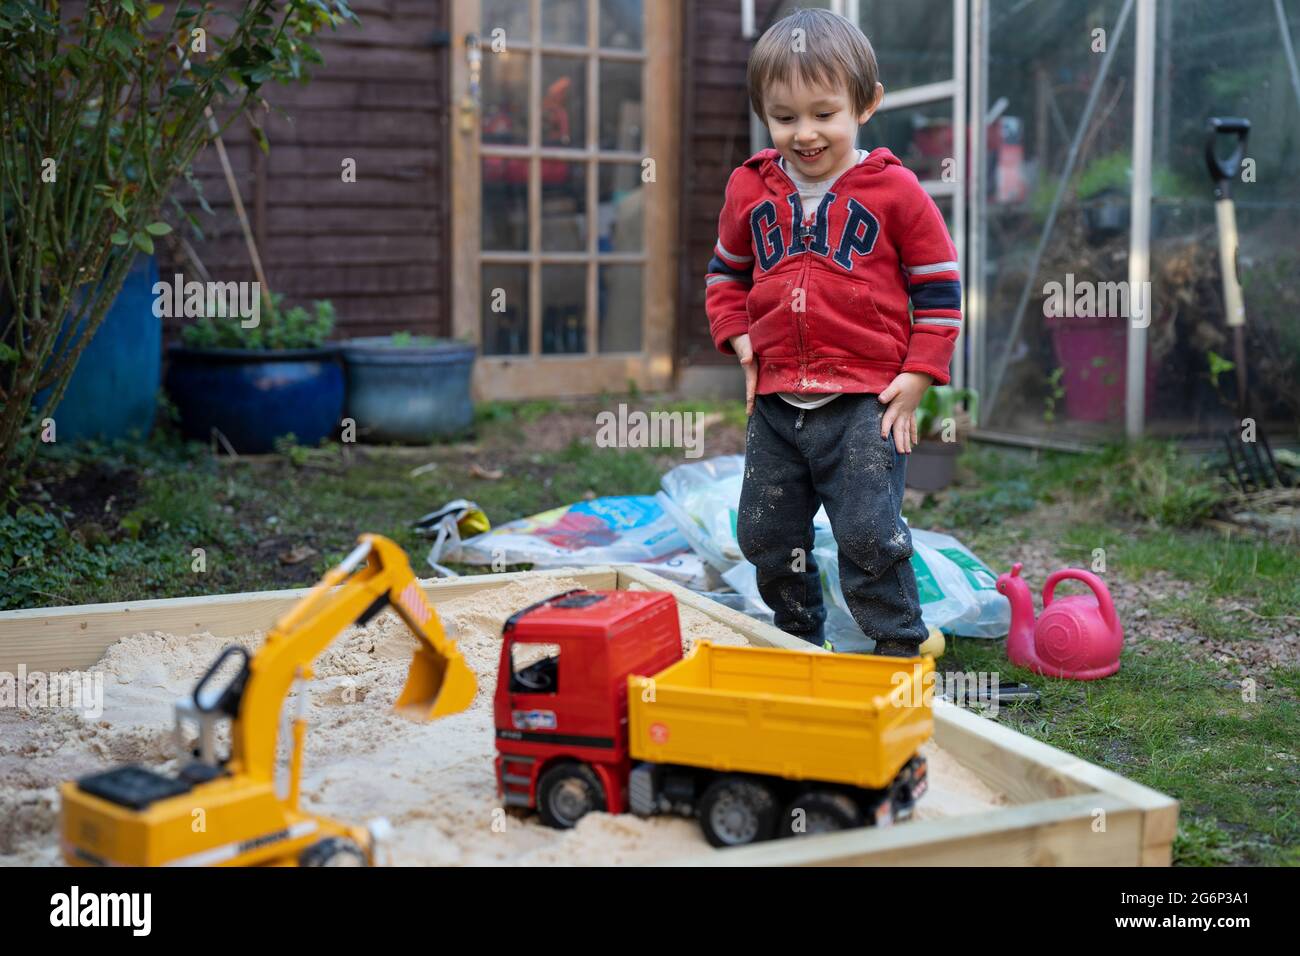 A young boy playing with toys outdoors Stock Photo